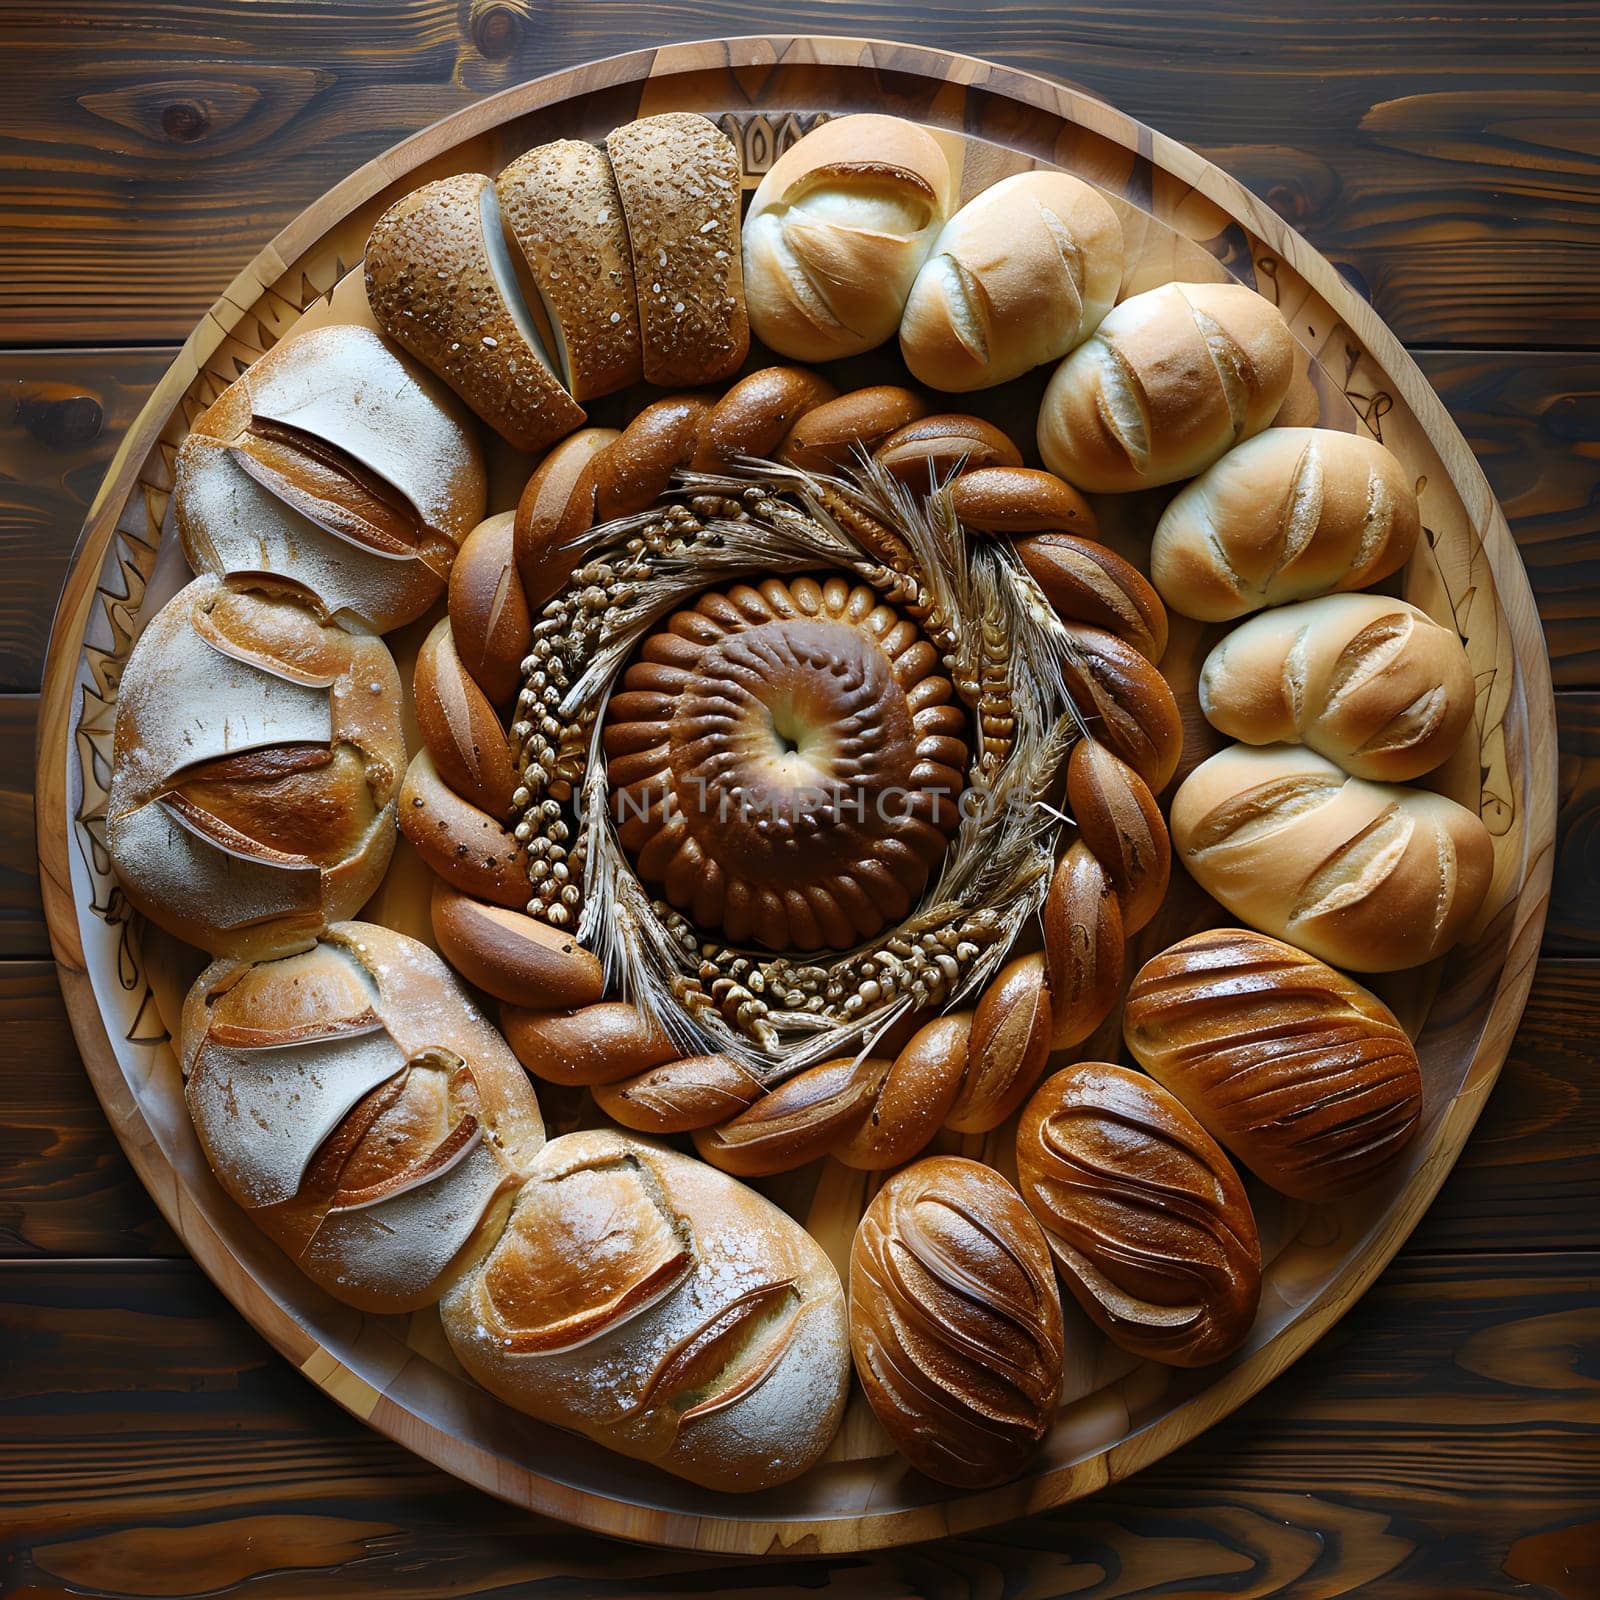 A wooden serveware tray adorned with a variety of artisan breads creating a beautiful display of culinary art. The breads are arranged in a circular pattern, enhancing the dishwares rustic charm